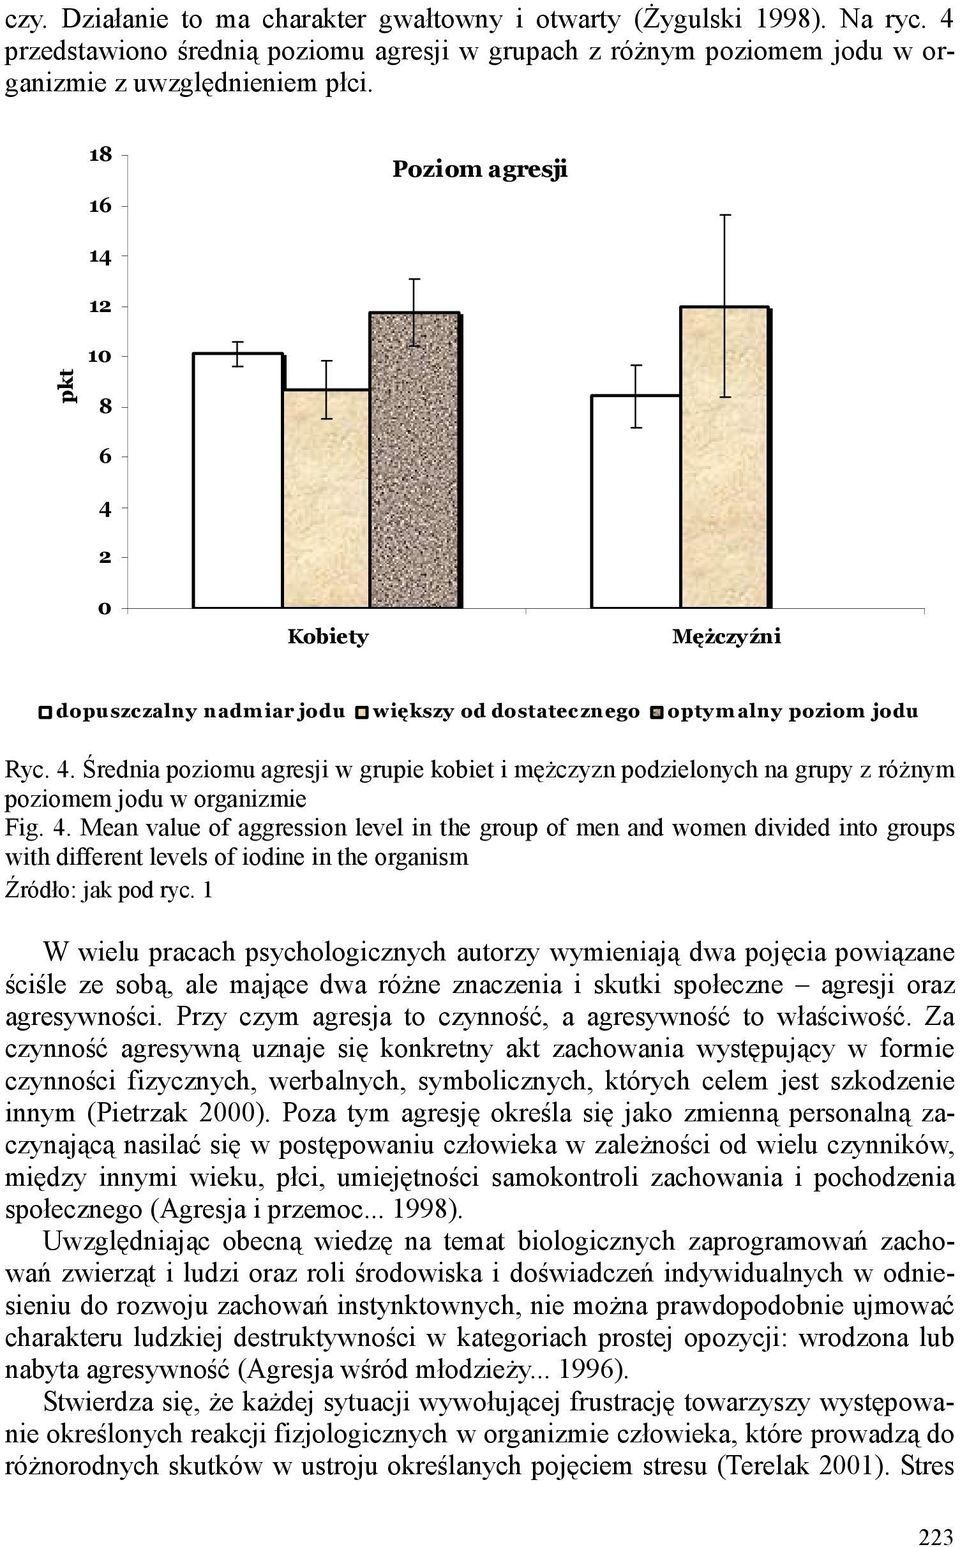 4. Mean value of aggression level in the group of men and women divided into groups with different levels of iodine in the organism Źródło: jak pod ryc.